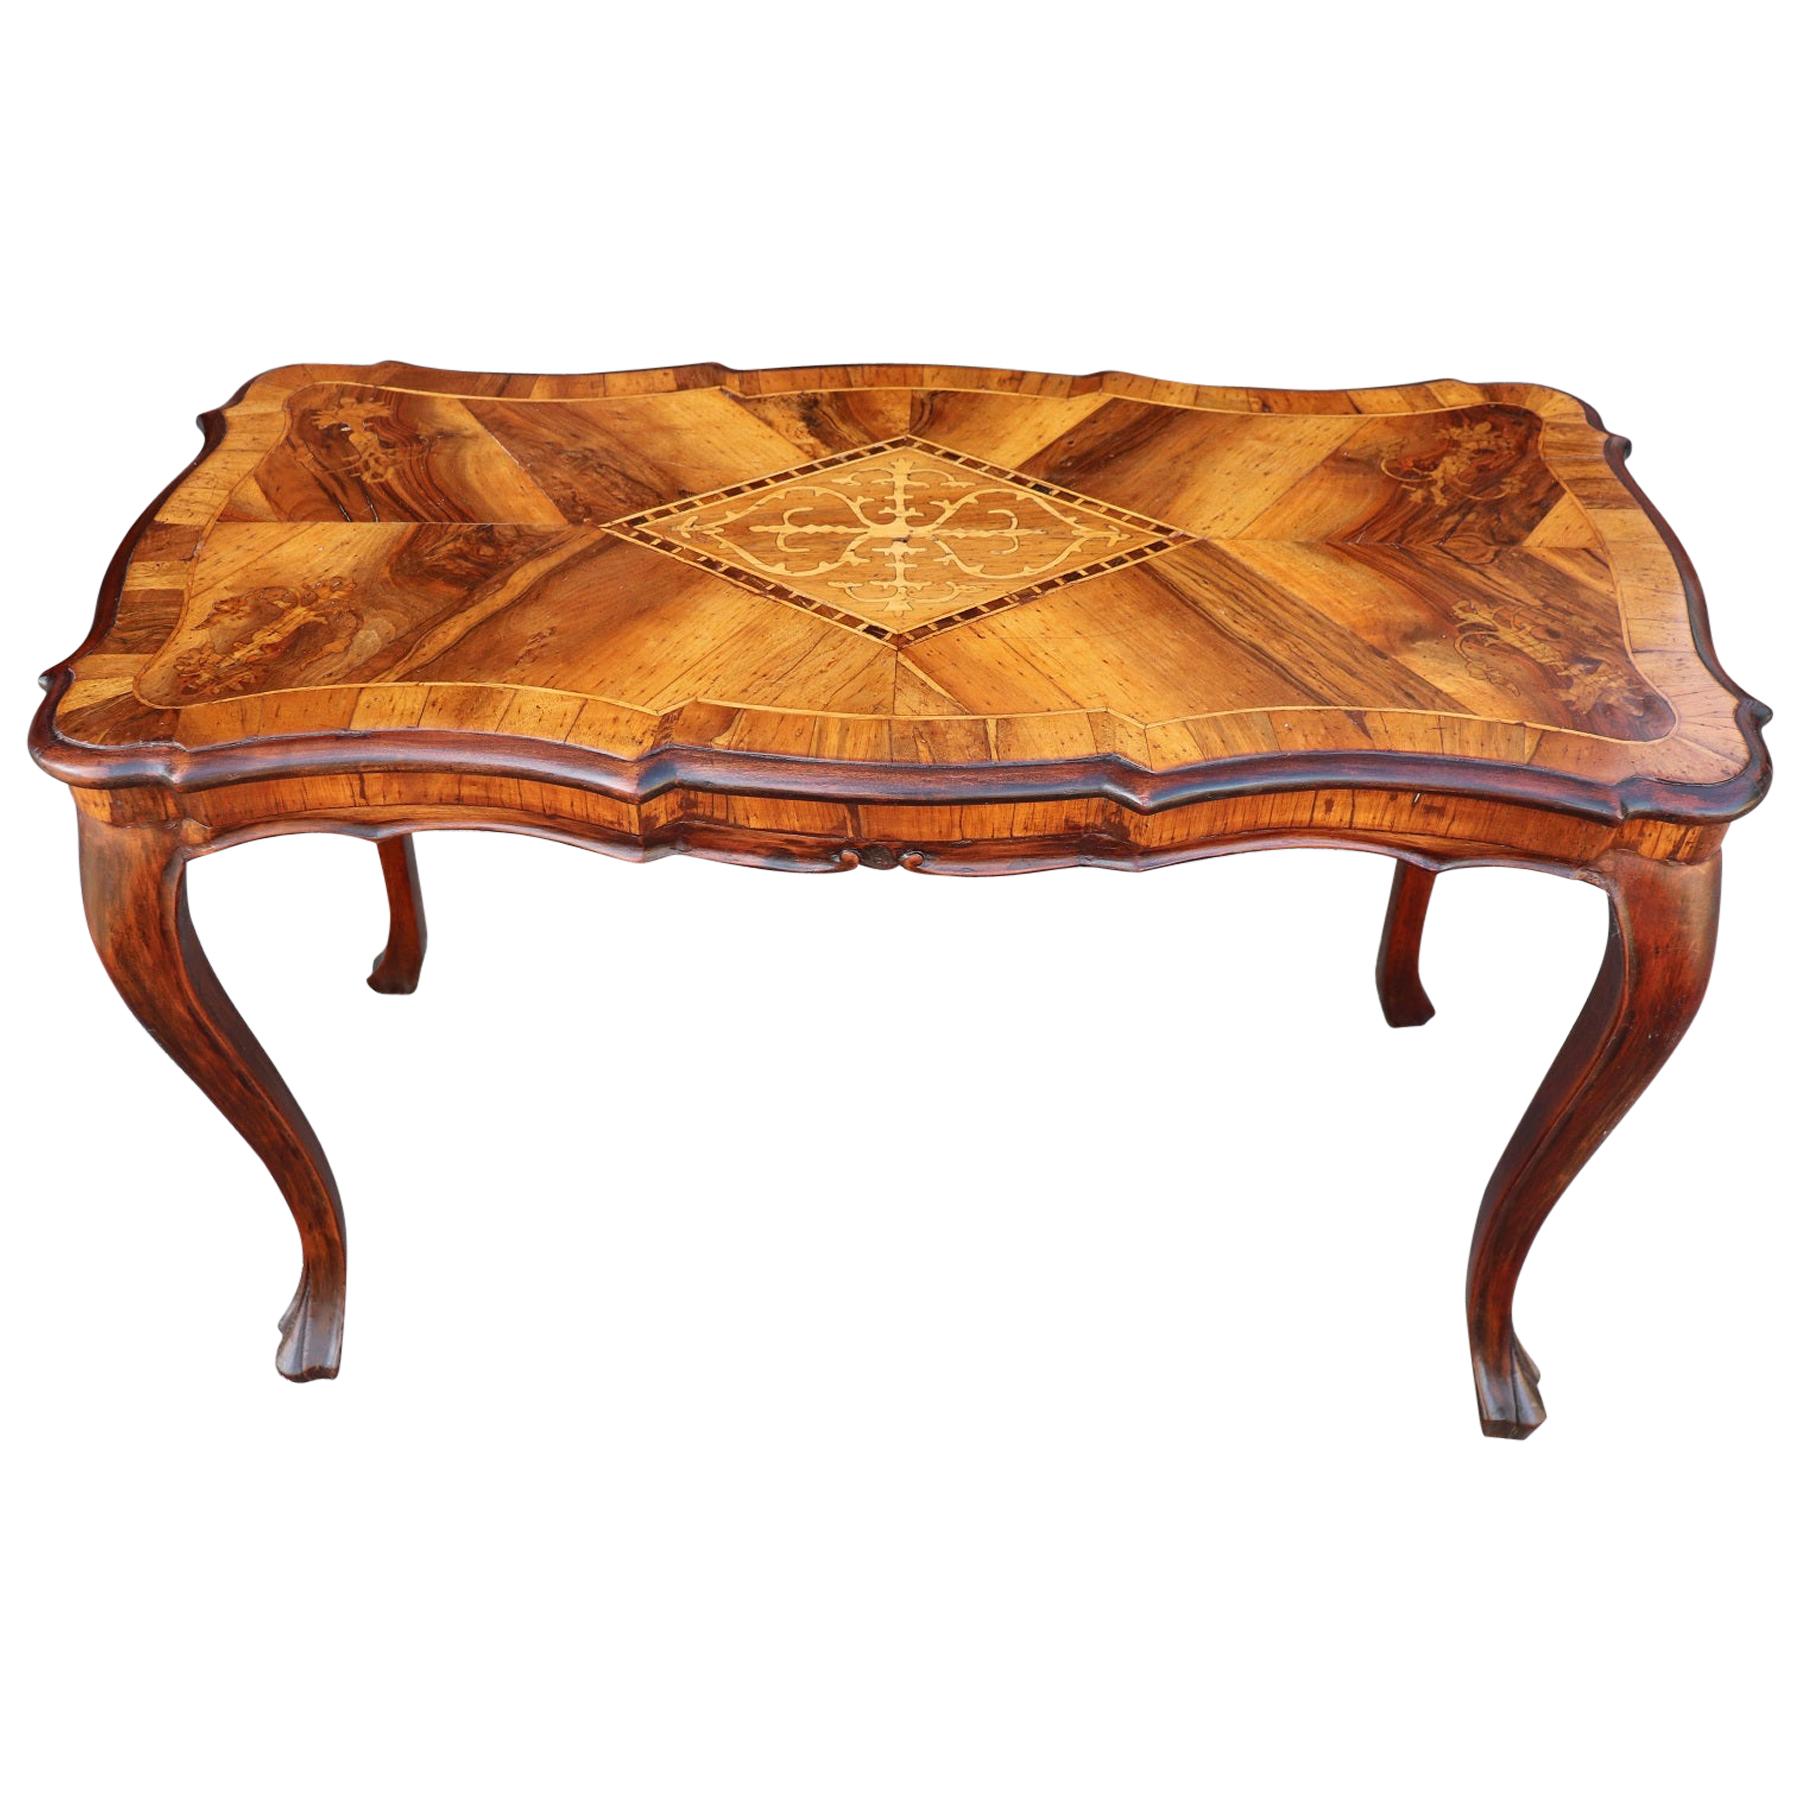 Late 19th Century Louis XV Style Inlaid Walnut Side Table or Sofa Table